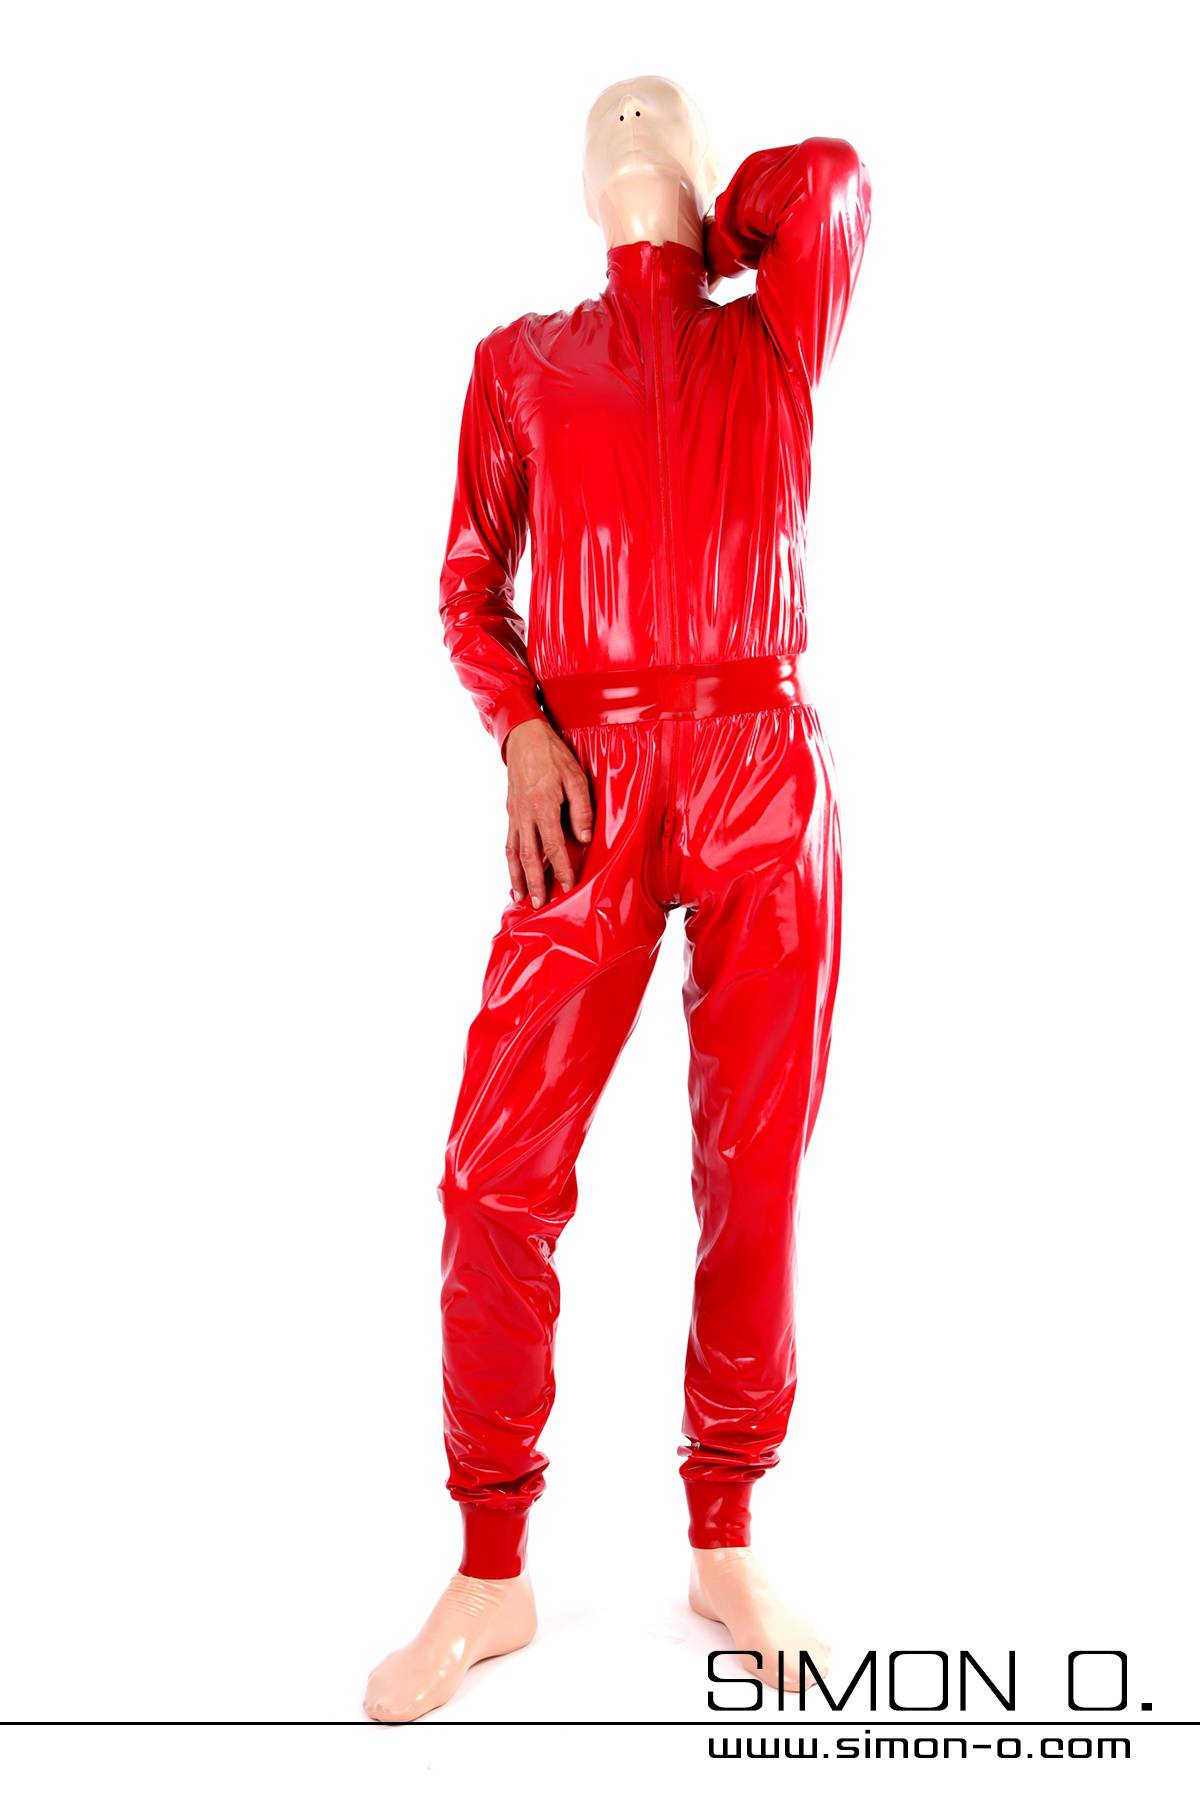 A man with a latex mask wears a loose latex catsuit in shining red